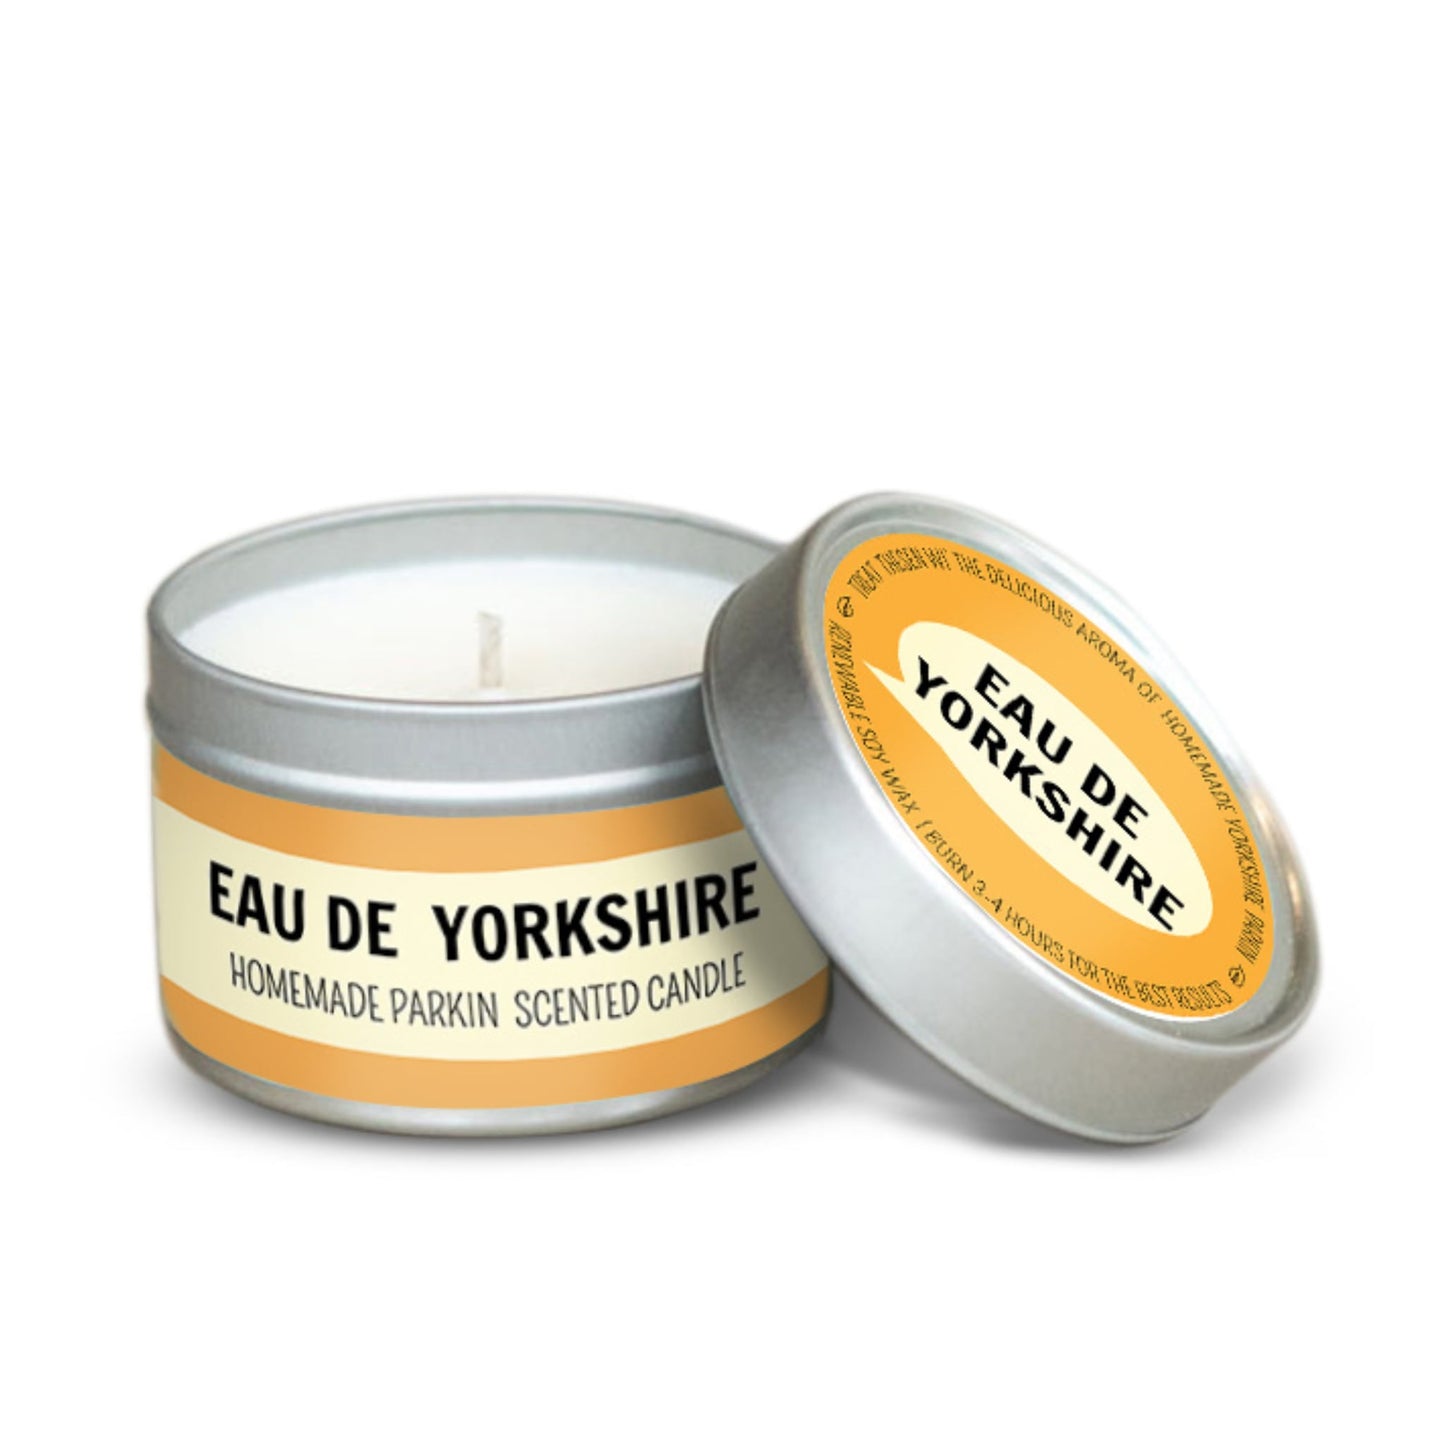 Homemade Parkin Eau De Yorkshire Scented Candle - The Great Yorkshire Shop